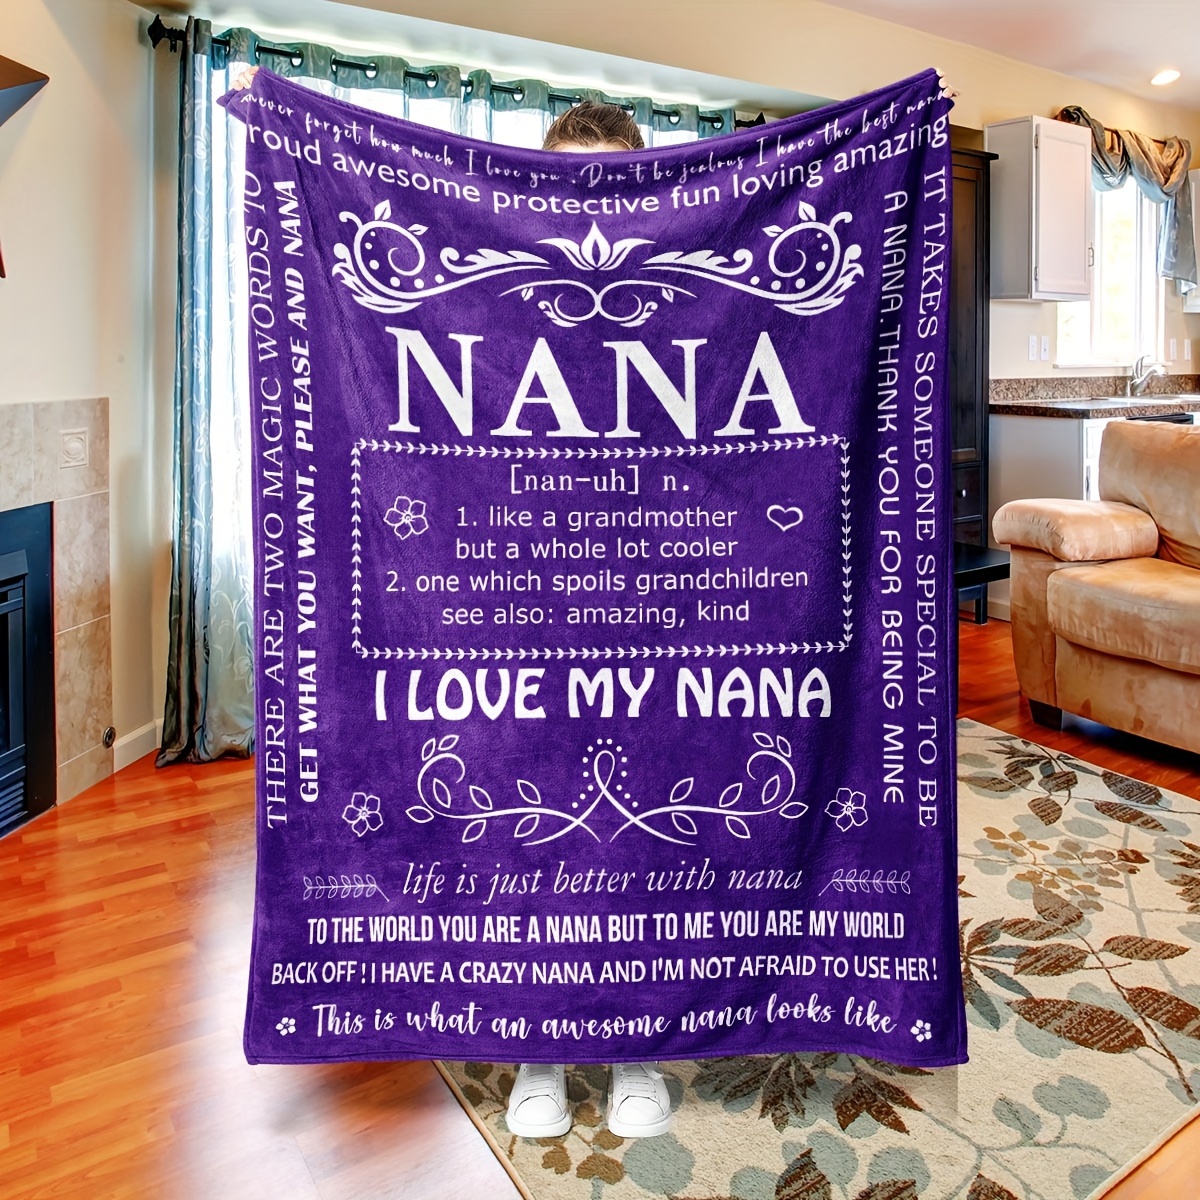 

1pc Nana Gifts Blanket, Grandma Gifts, Birthday Gifts, Purple Blanket Throw Blanket, Warm Cozy Soft Blanket For Couch Bed Sofa Office Camping